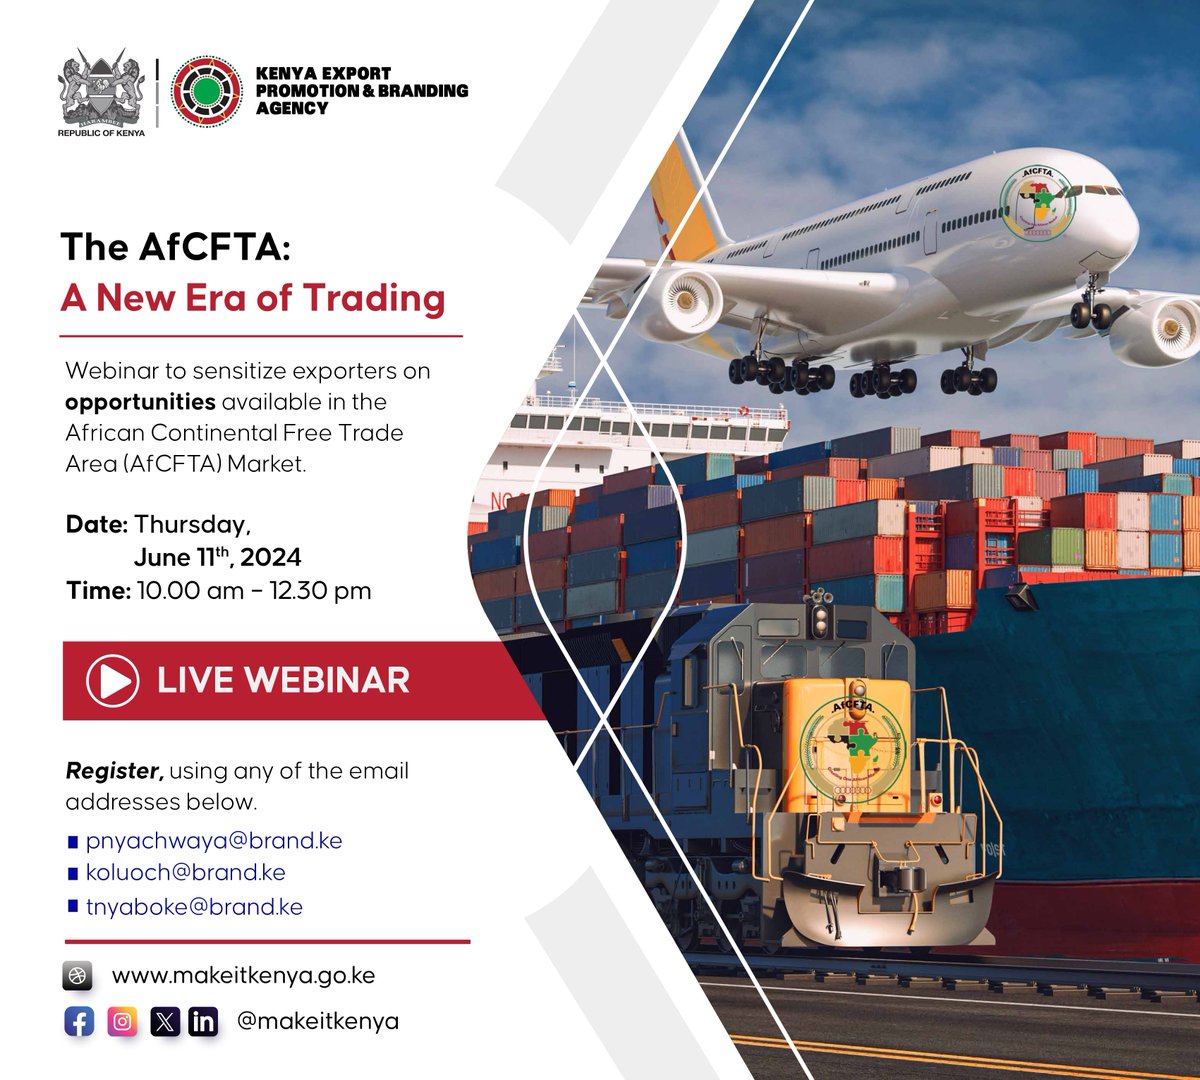 THE AfCFTA - A NEW ERA OF TRADING WEBINAR Join us on Thursday, June 11th, 2024, from 10:00 AM – 12:30 PM for an insightful webinar on AfCFTA. Discover opportunities in the African Continental Free Trade Area (AfCFTA) market and learn how exporters can benefit.